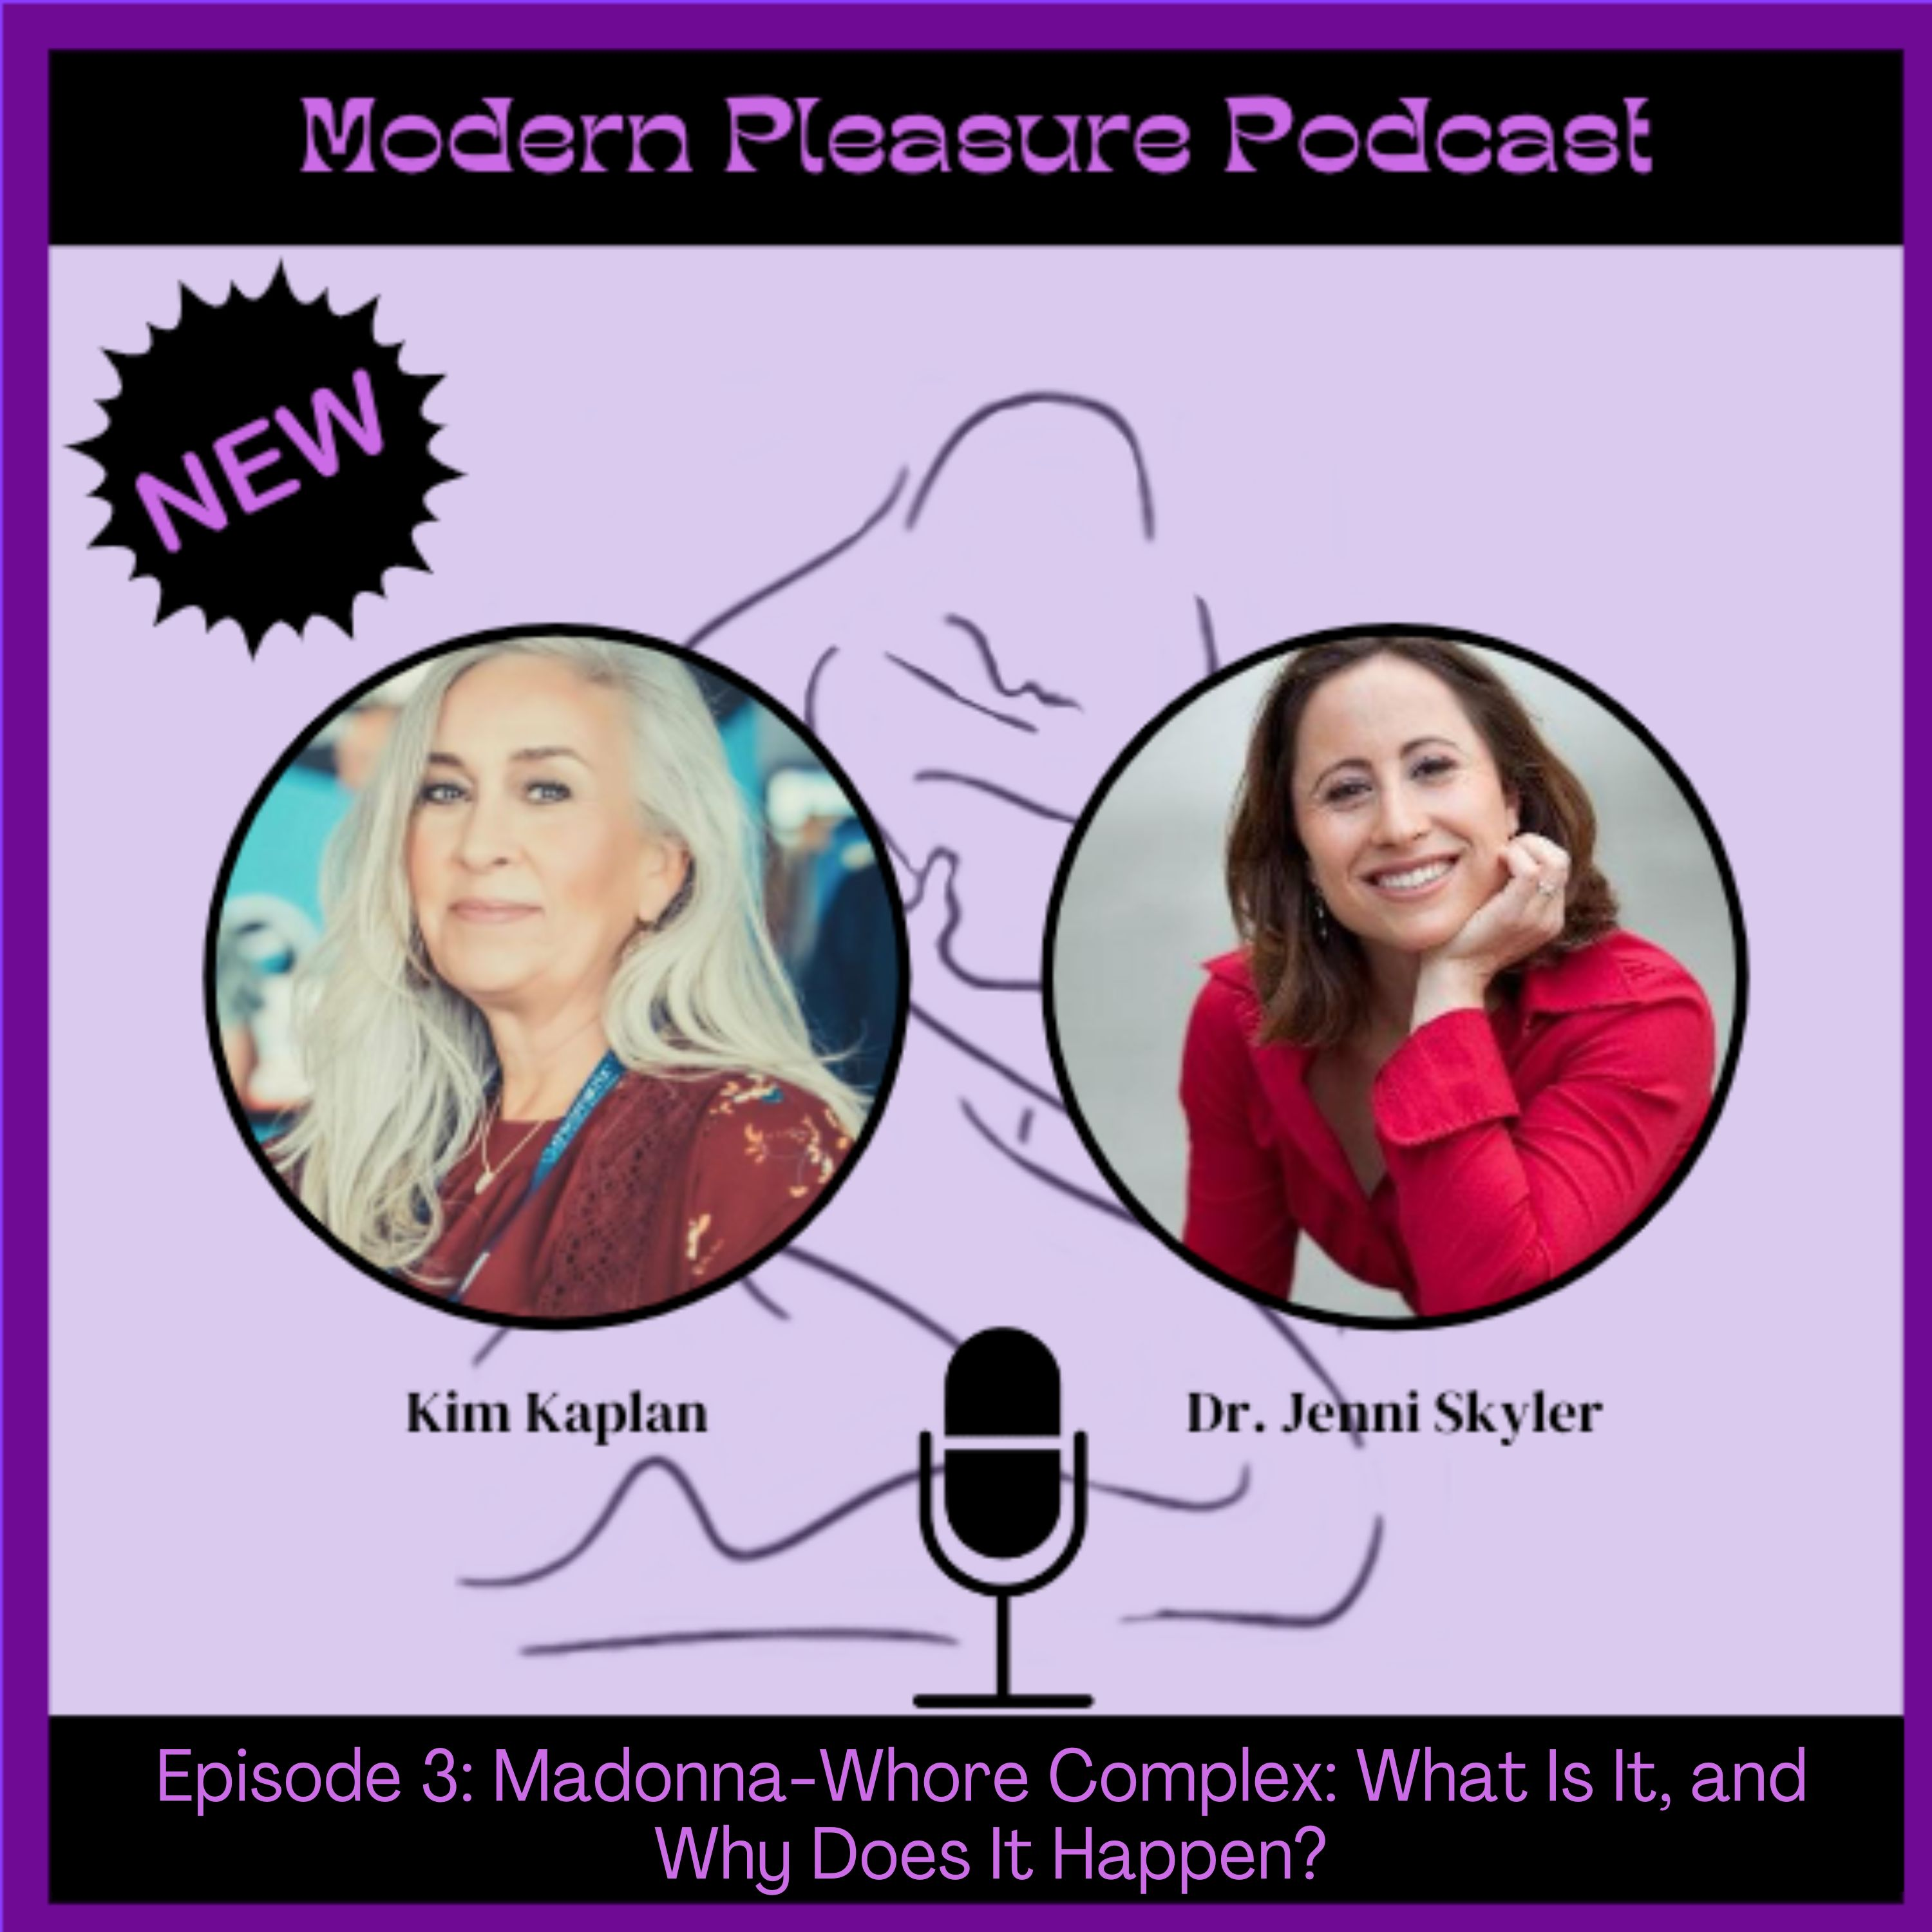 Episode 3: Madonna-Whore Complex - What Is It and Why Does This Happen?